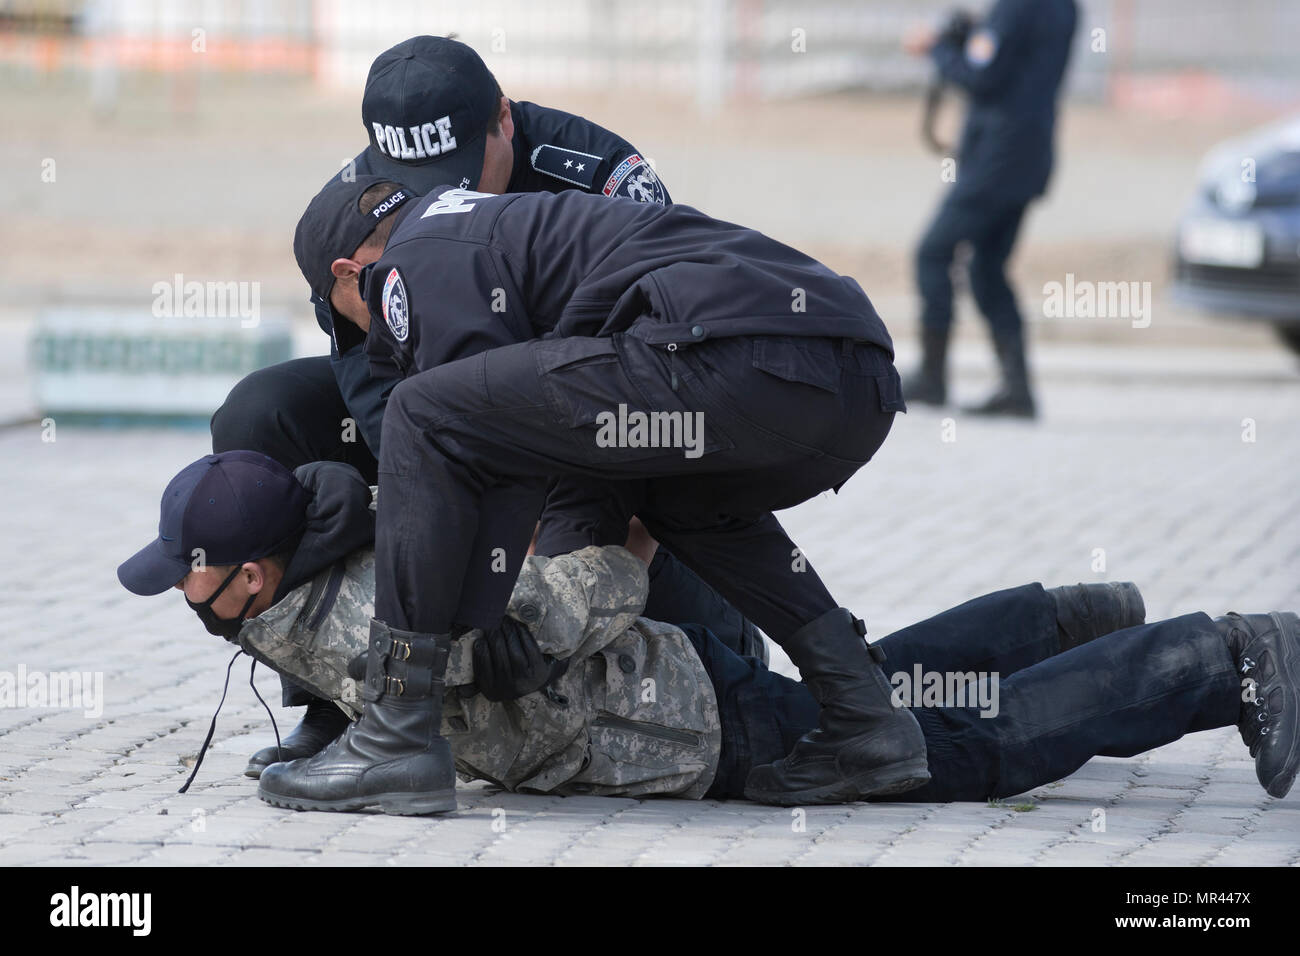 Dalanzadgad police officers apprehend a simulated looter May 4, 2017, in Dalanzadgad, Mongolia, as part of a rescue exercise during Gobi Wolf 2017. GW 17 is hosted by the Mongolian National Emergency Management Agency and Mongolian Armed Forces as part of the United States Army Pacific's humanitarian assistance and disaster relief 'Pacific Resilience' series. (U.S. Army photo by Sgt. David Bedard) Stock Photo